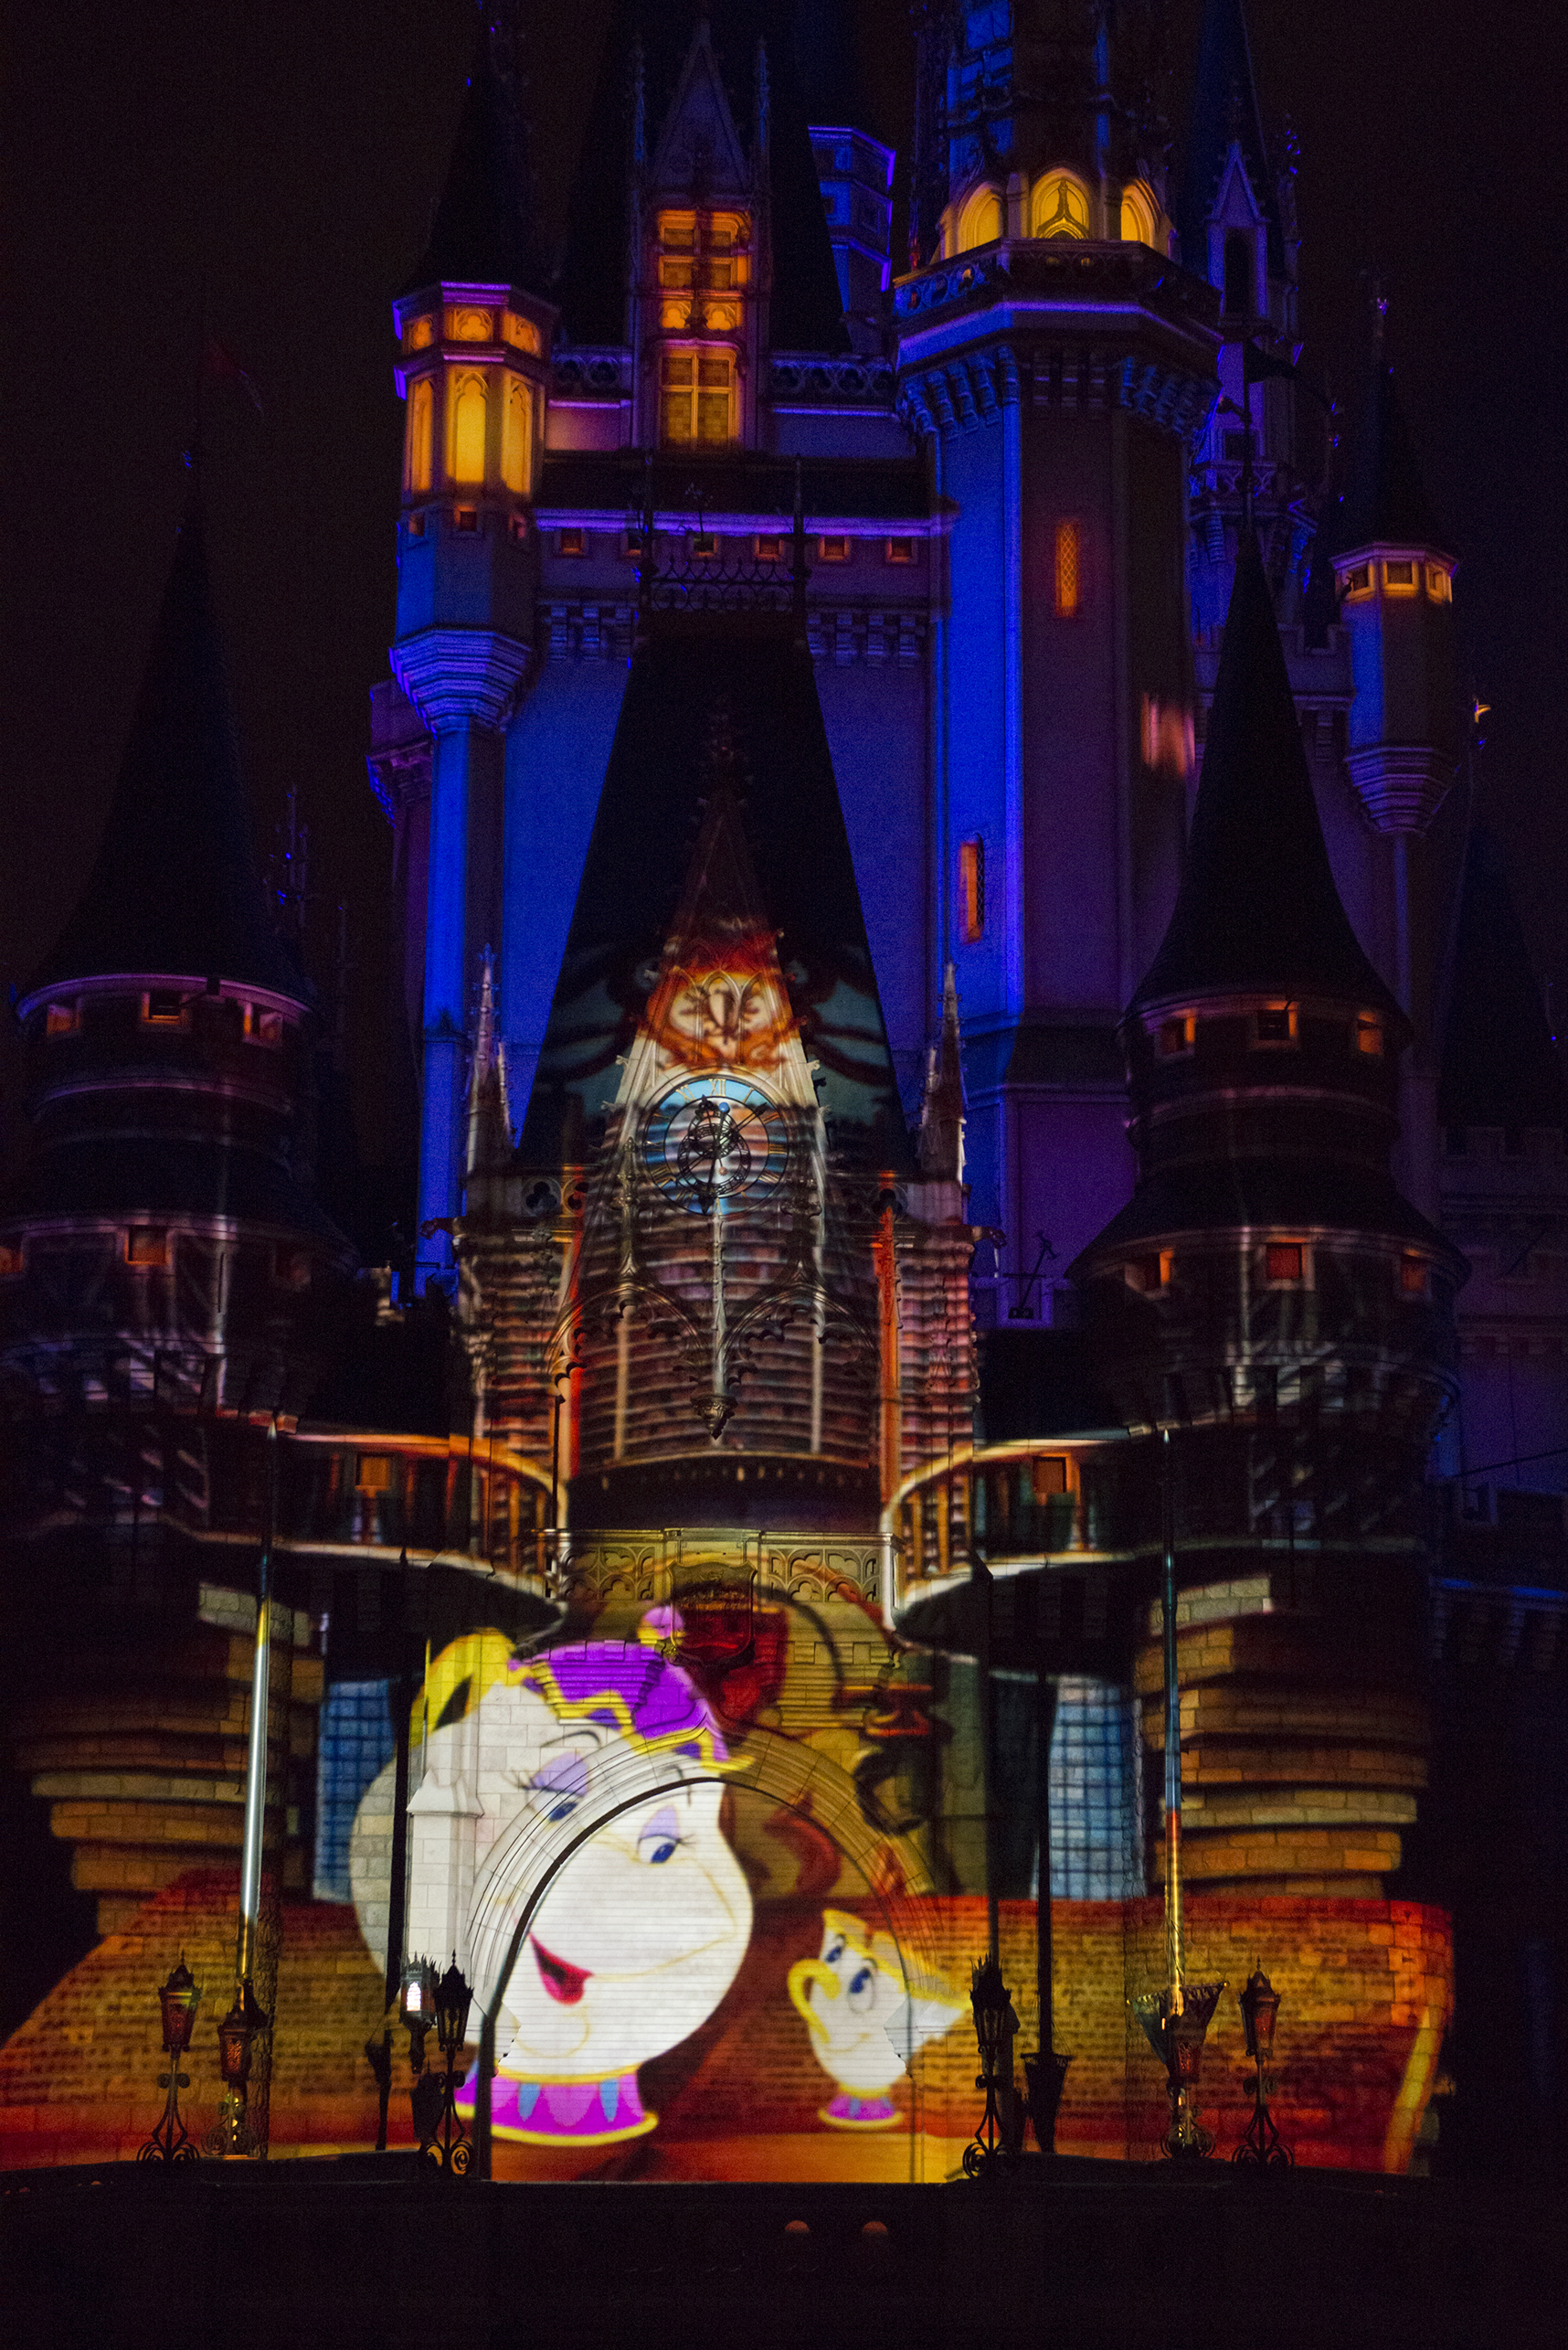  "Once Upon a Time" is a Nighttime Projection Show on Cinderella Castle at Magic Kingdom